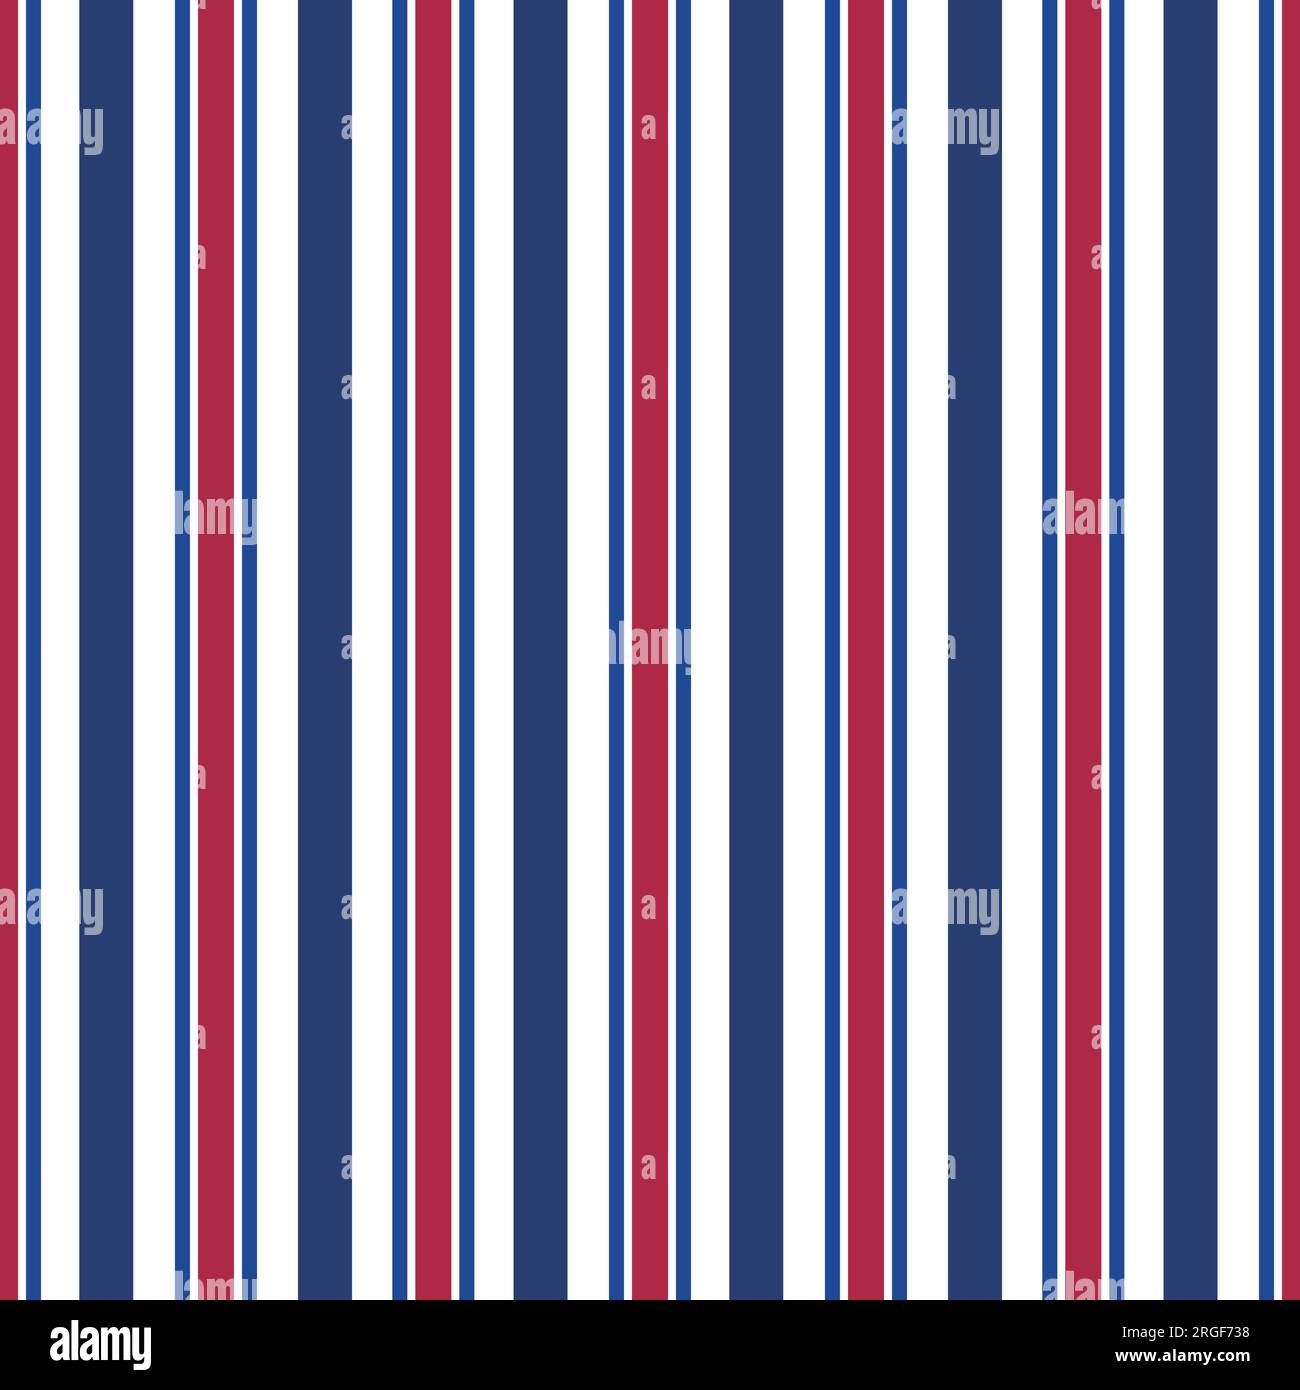 Blue and red vertical stripe shirt or blouse pattern. Seamless vector linear design suitable for fashion, home decor and stationary. Stock Vector